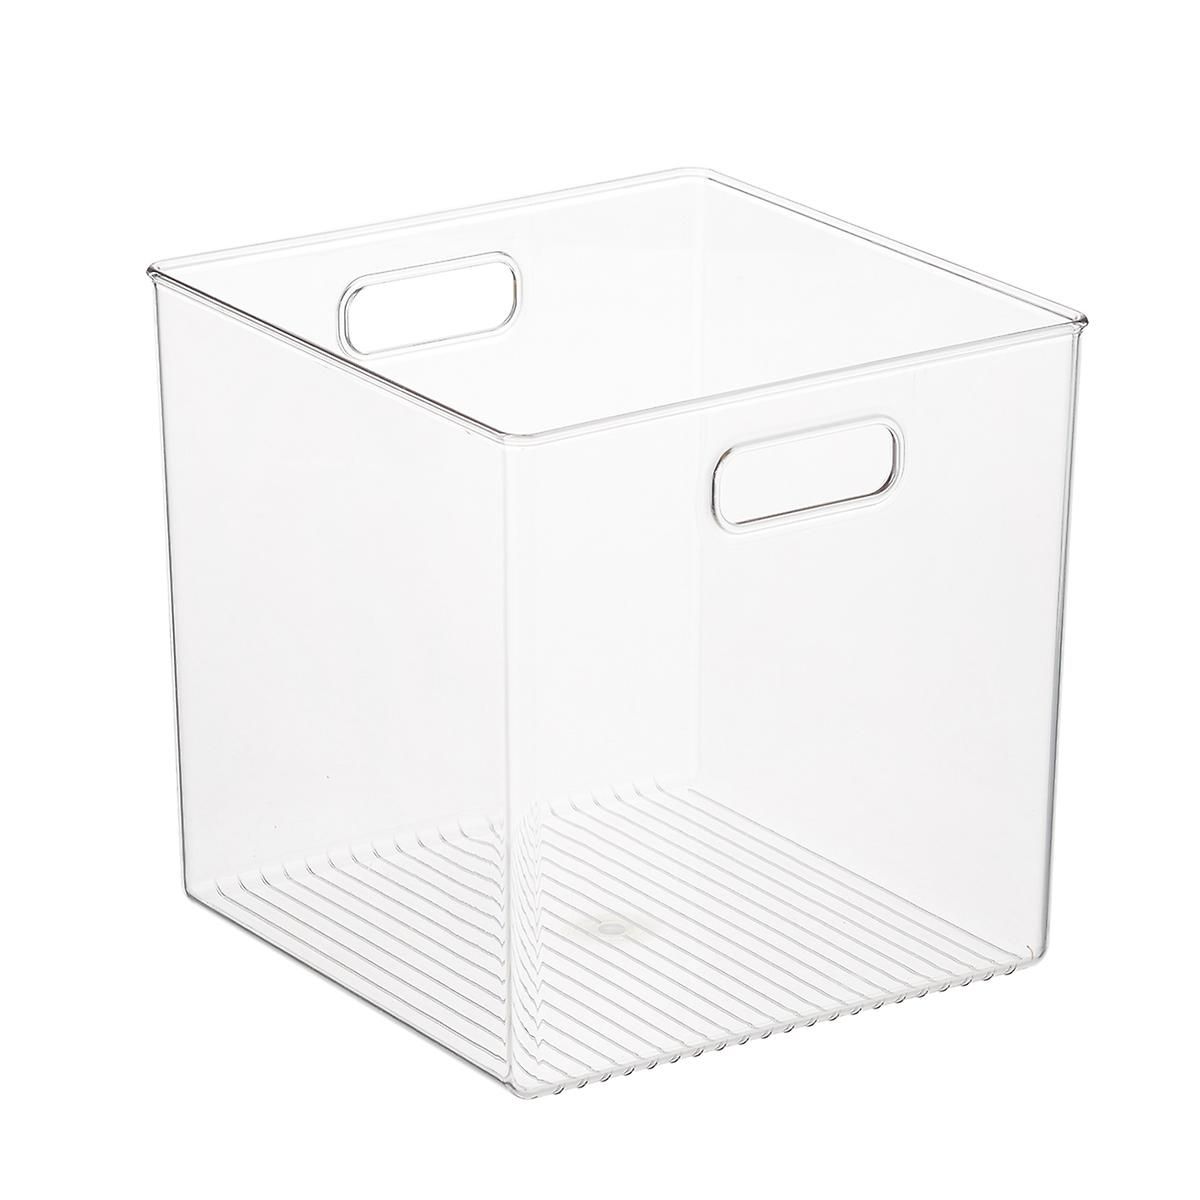 iDESIGN Large Linus Cube Bin w/ Handles Clear | The Container Store